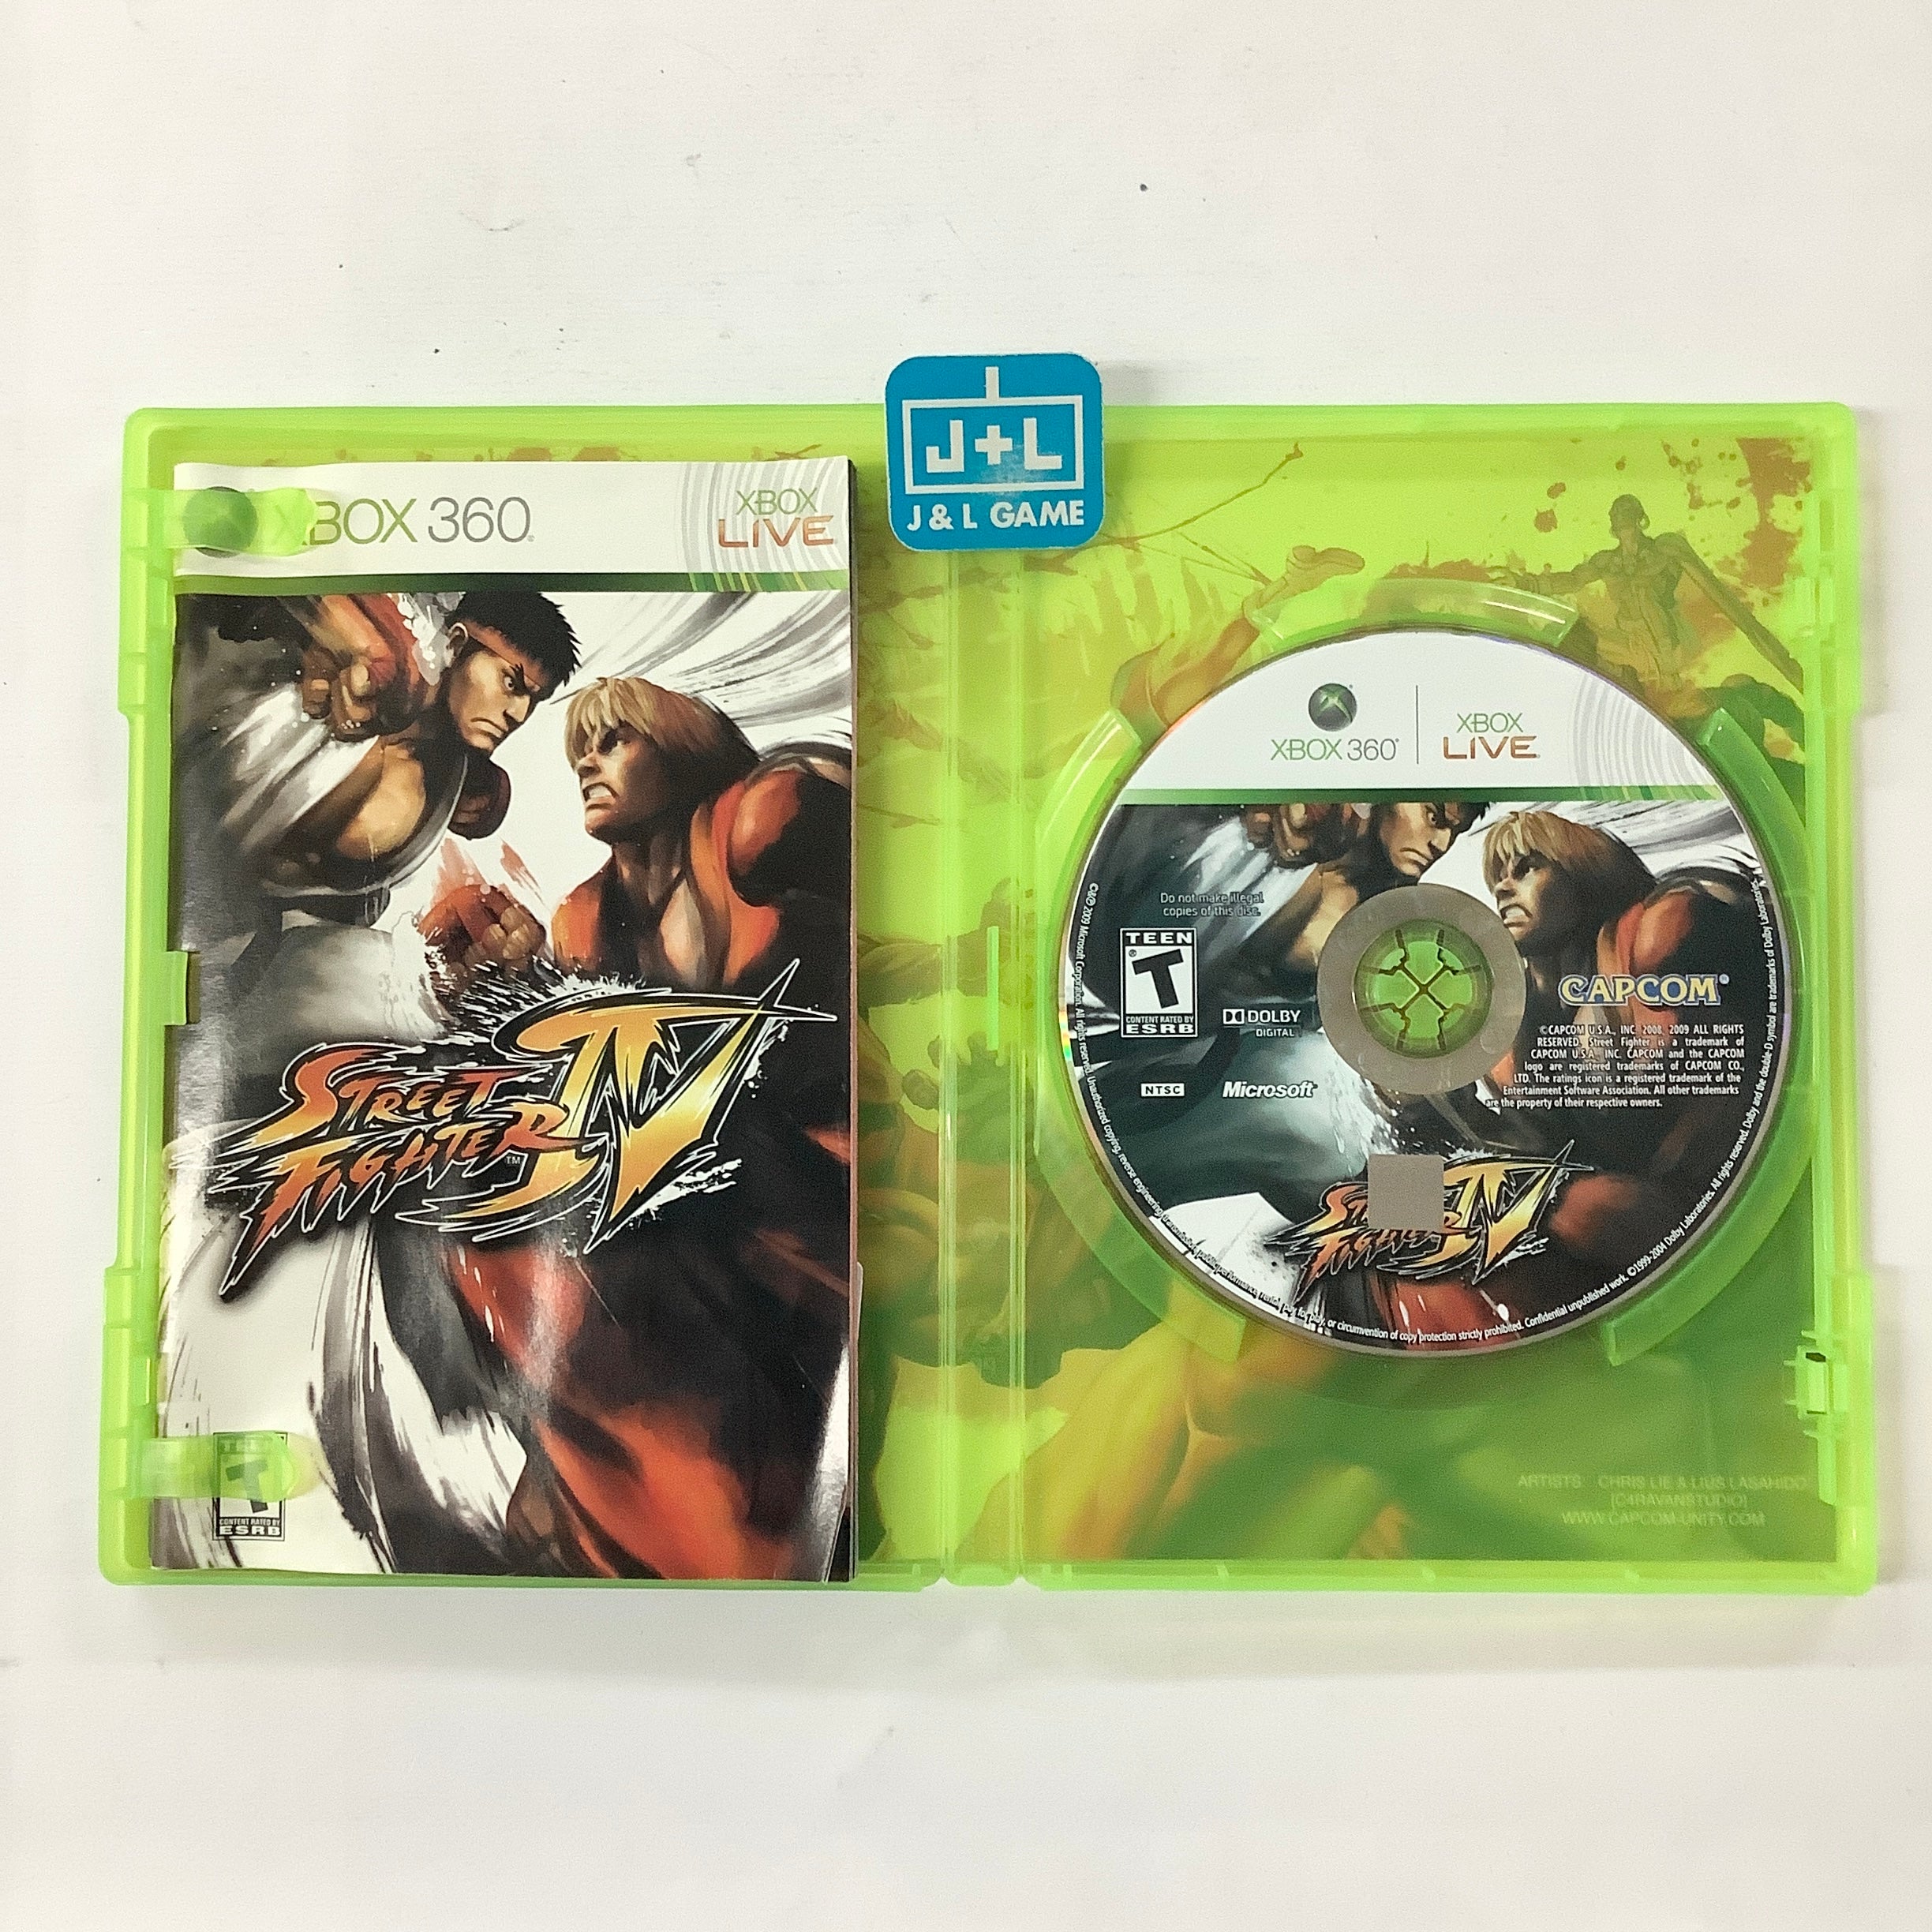 Street Fighter IV - Xbox 360 [Pre-Owned] Video Games Capcom   